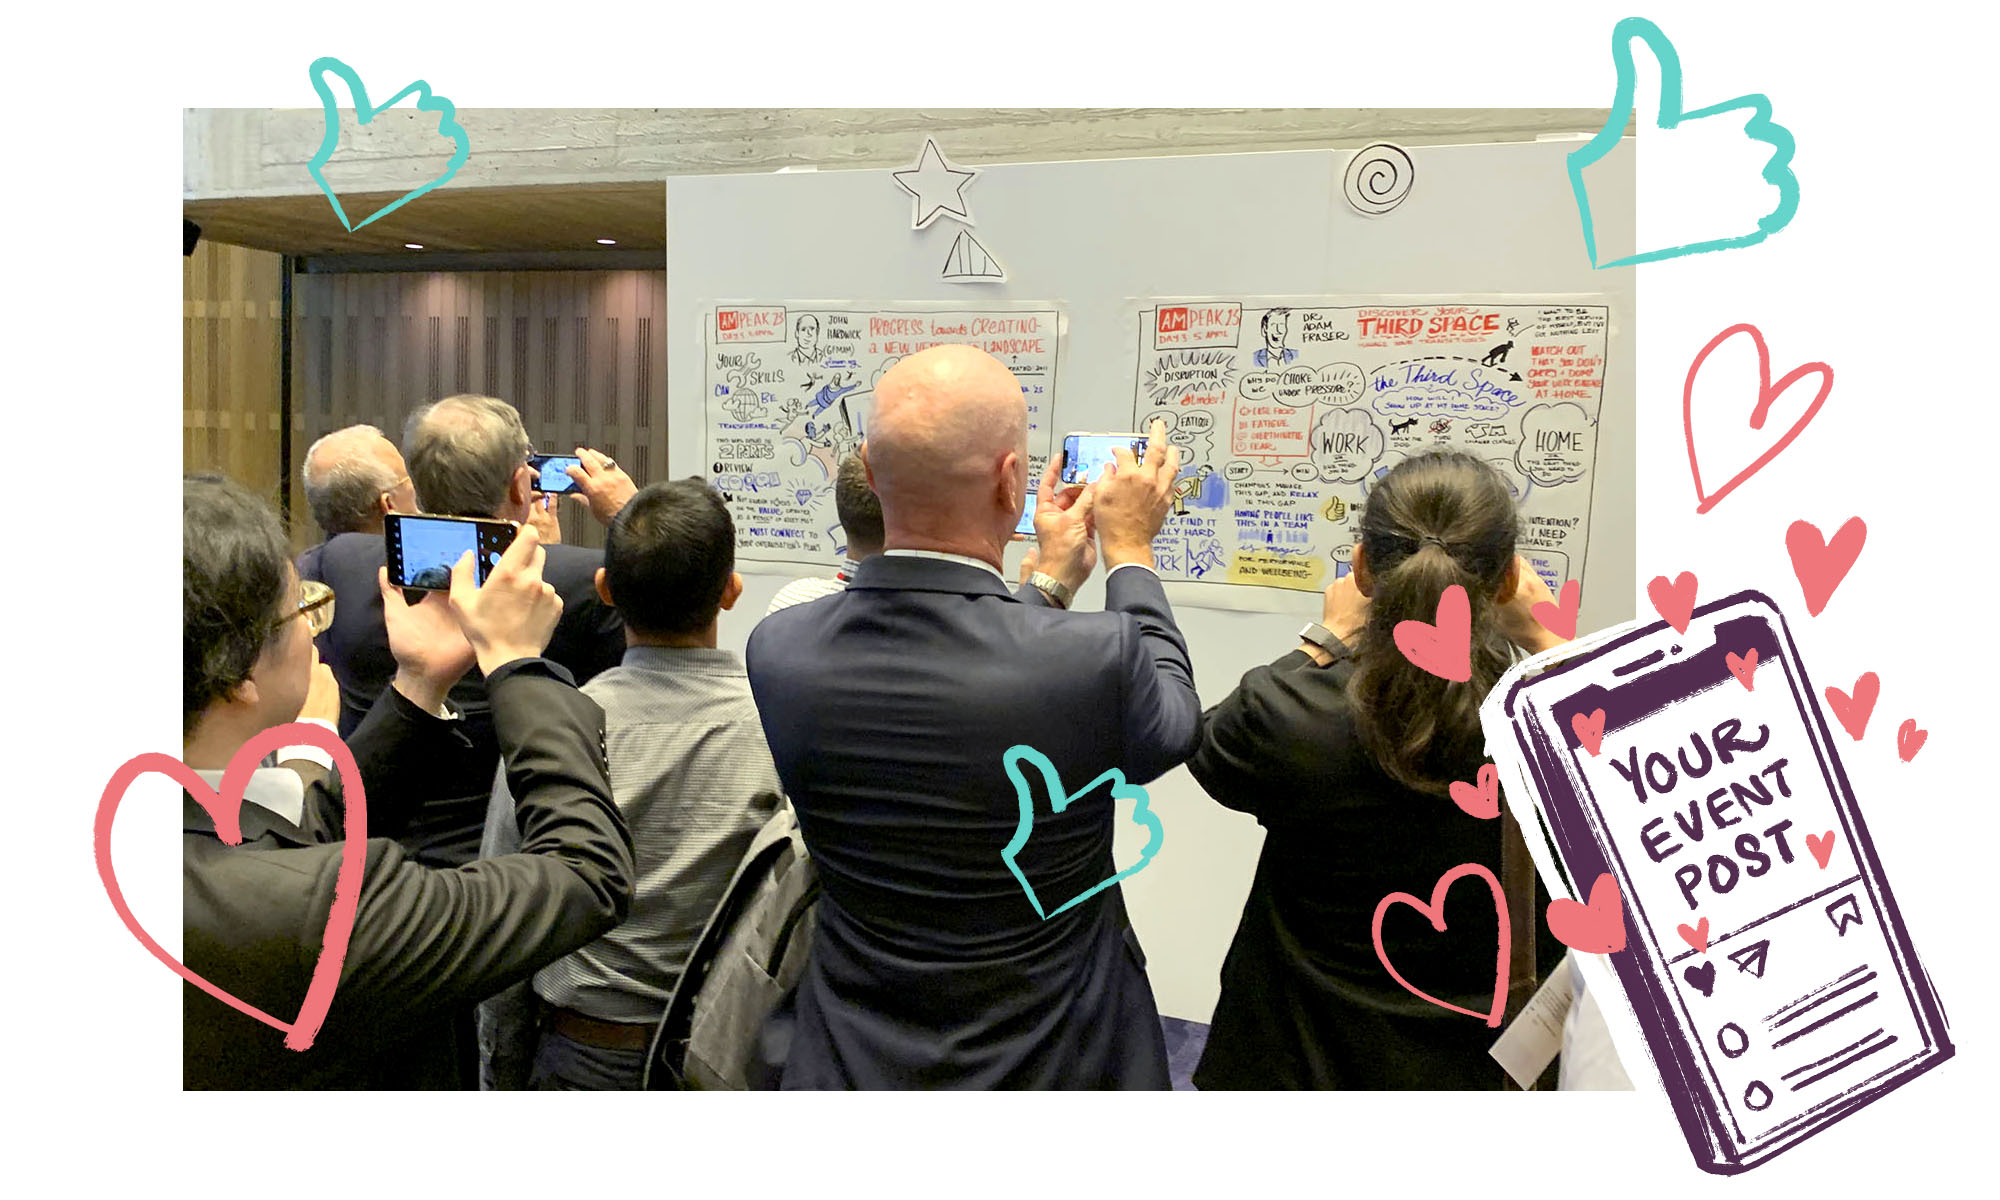 A photo of several people taking photos on their phones of a graphic recording chart by Ben Crothers